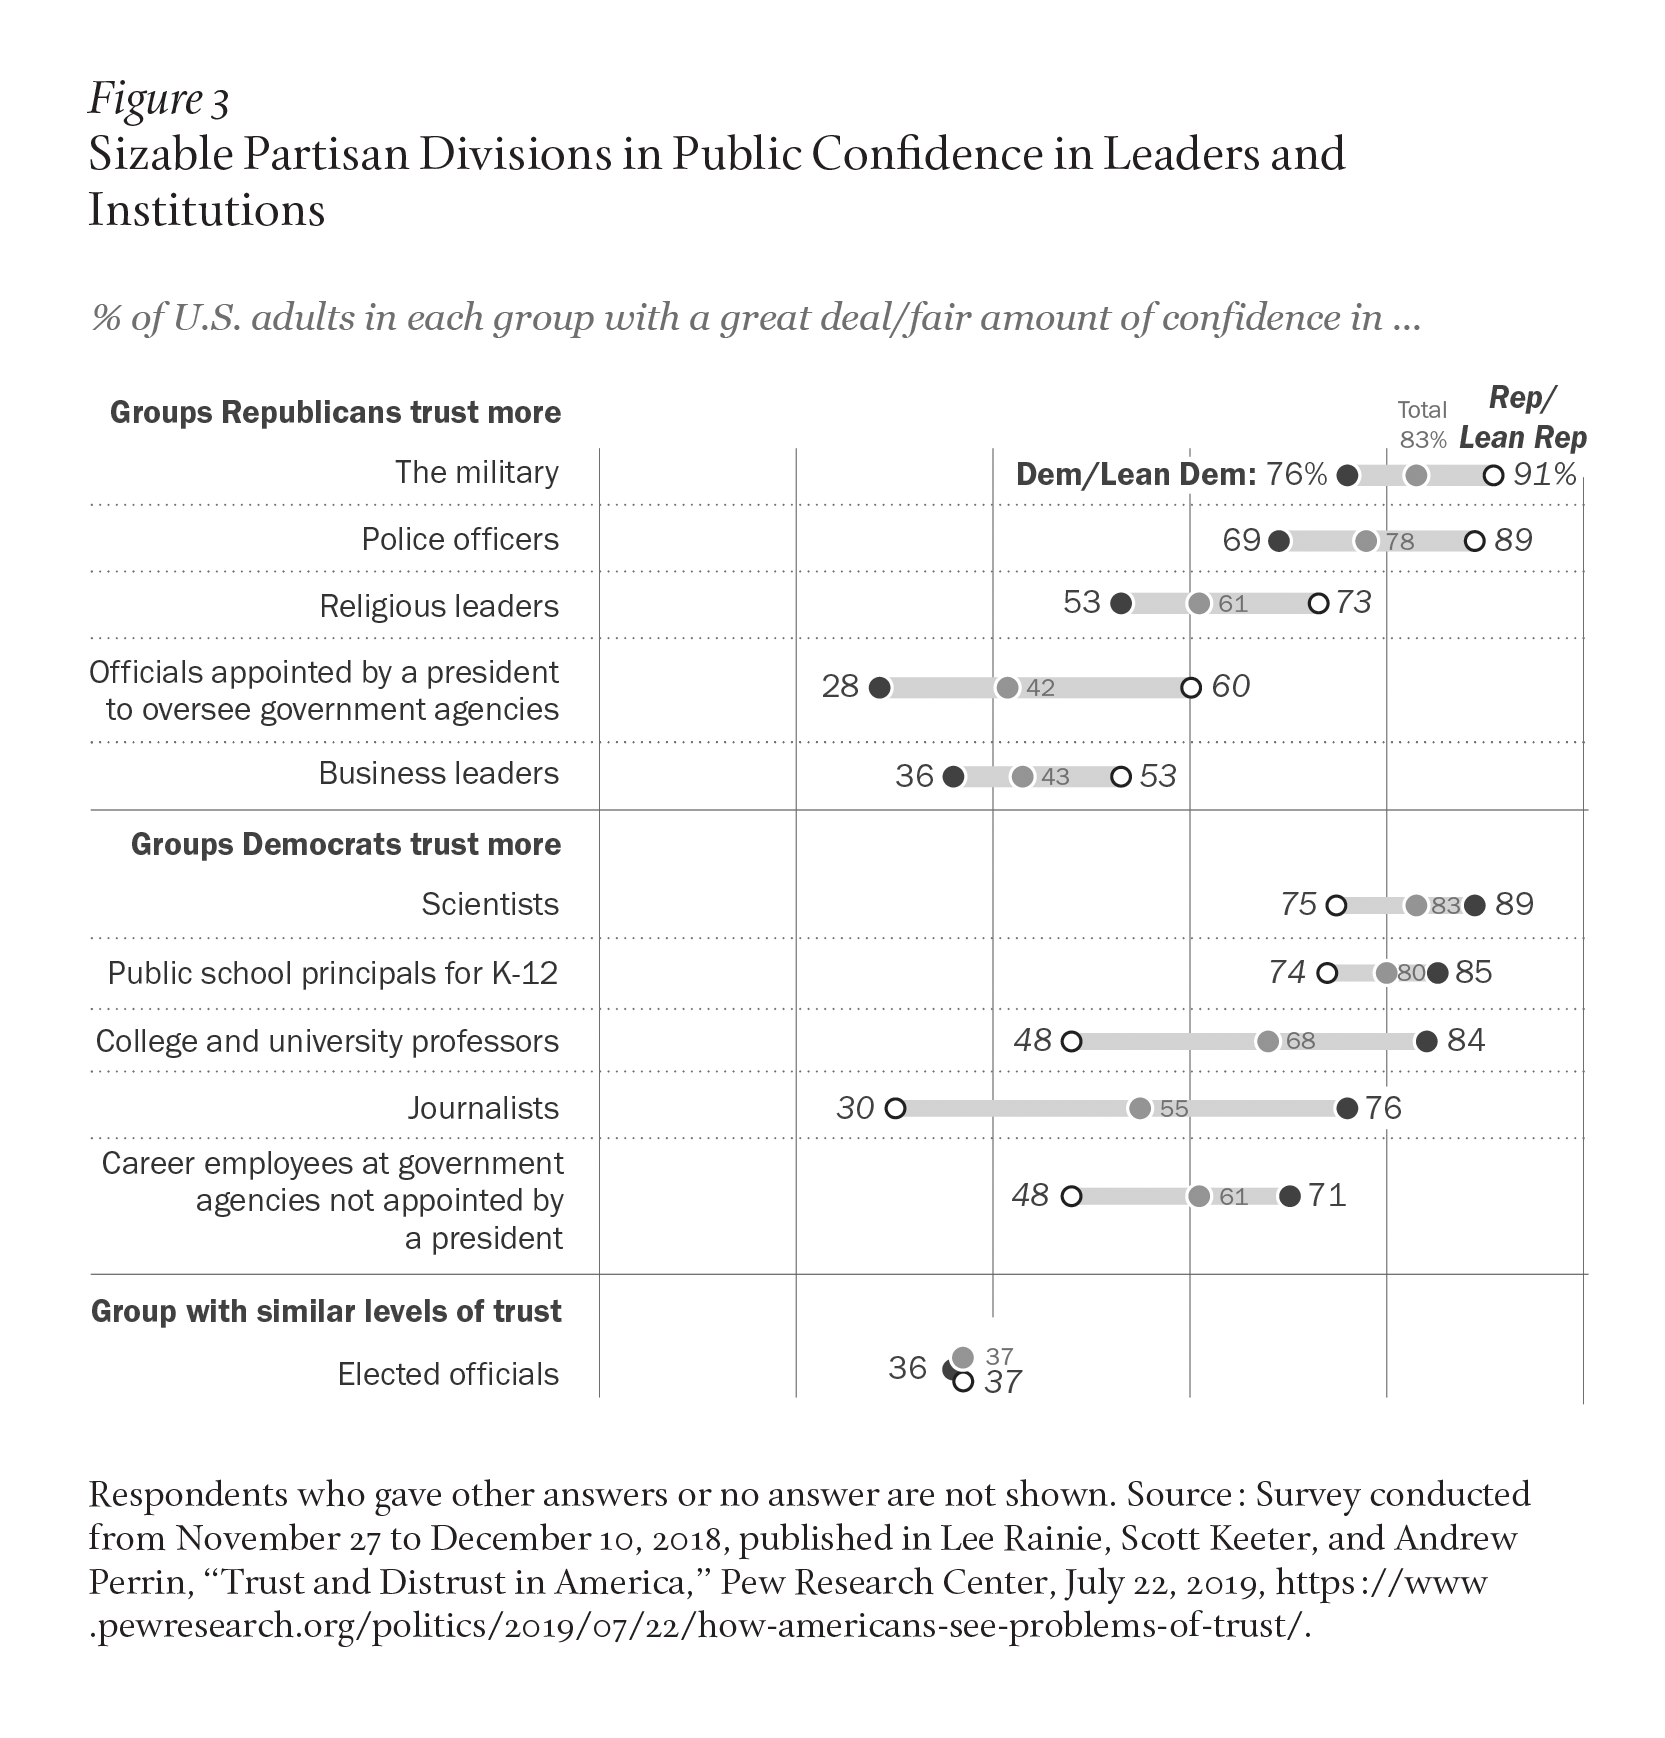 Image description: A chart shows which leaders and institutions Democrats and Republicans trust more. Republicans have more trust than Democrats in the military, police, religious leaders, officials appointed by presidents, and business leaders. Democrats have more trust than Republicans in scientists, K-12 principals, professors, journalists, officials not appointed by presidents. Both groups trust elected officials. Caption: Source: “Trust and Distrust in America,” Pew Research Center, July 22, 2019.